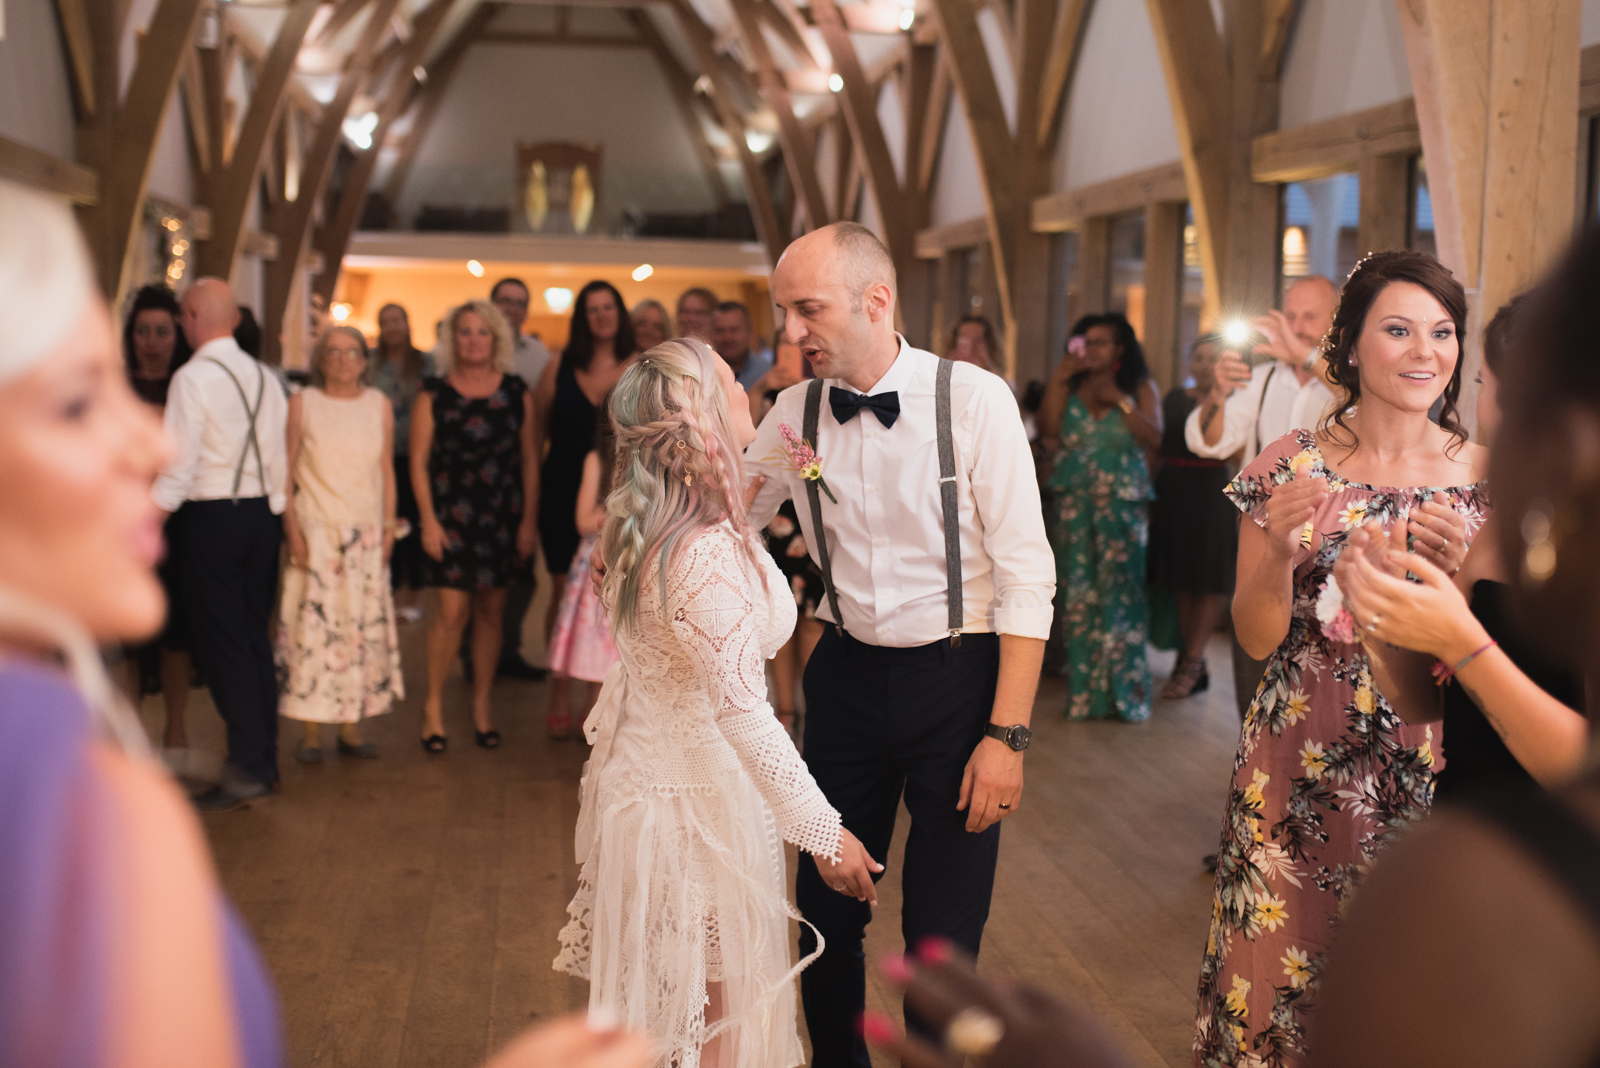 The Mill barns - the first dance